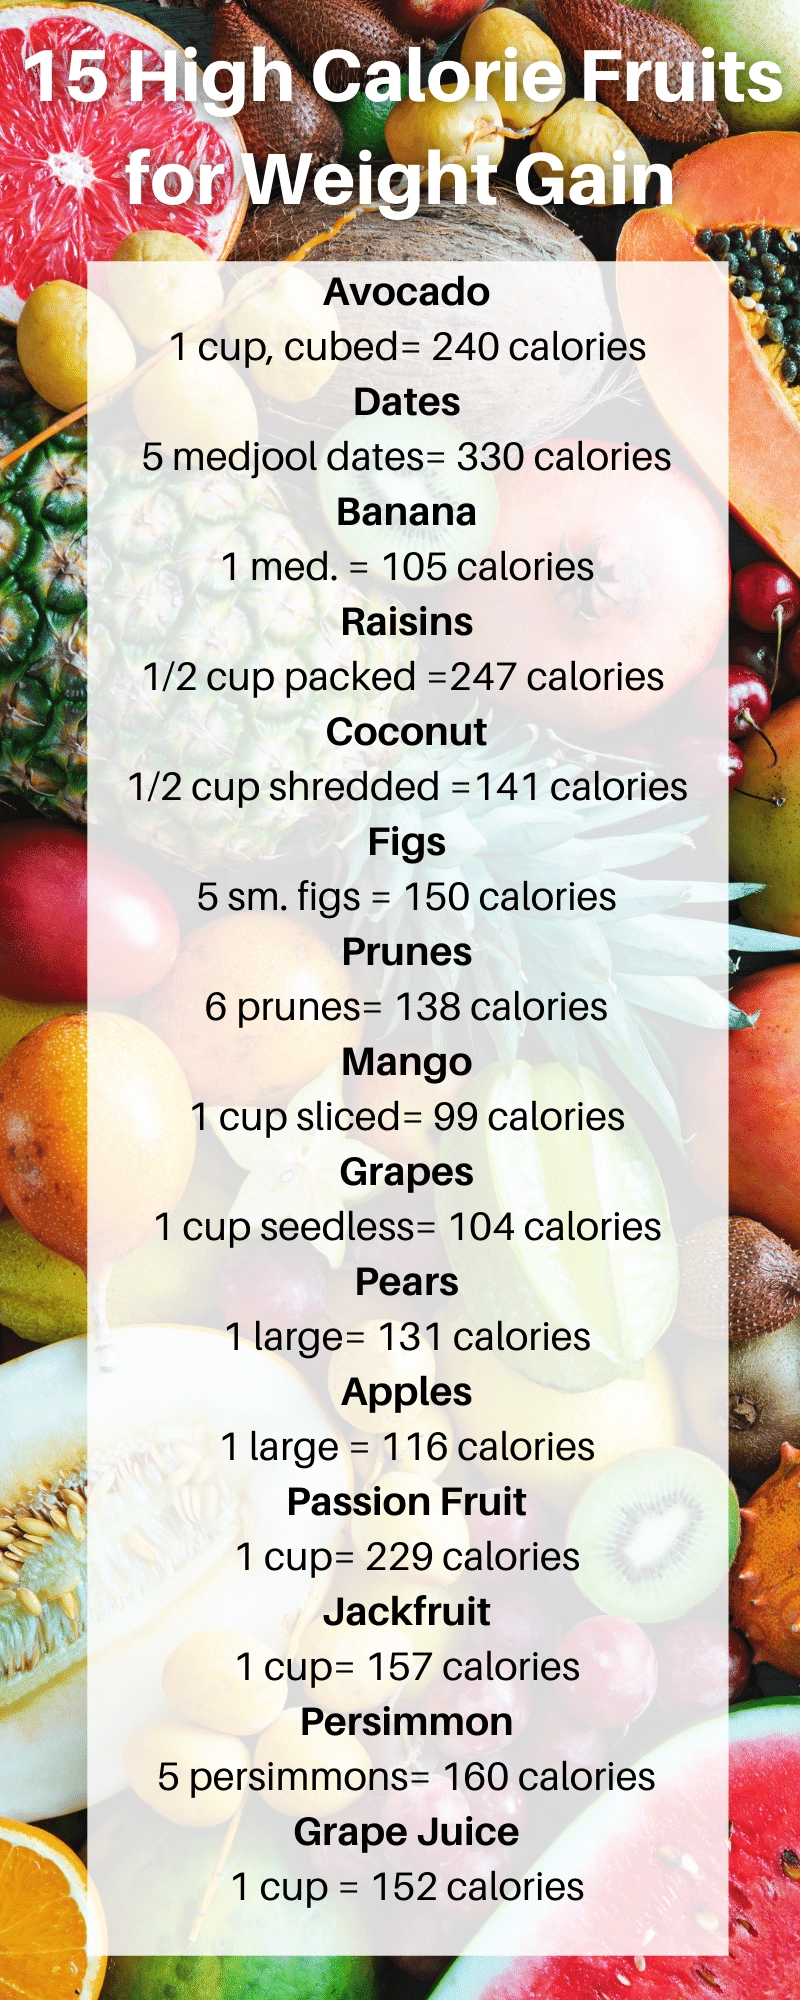 https://thegeriatricdietitian.com/wp-content/uploads/2021/08/15-High-Calorie-Fruits-for-Weight-Gain-Infographic.png